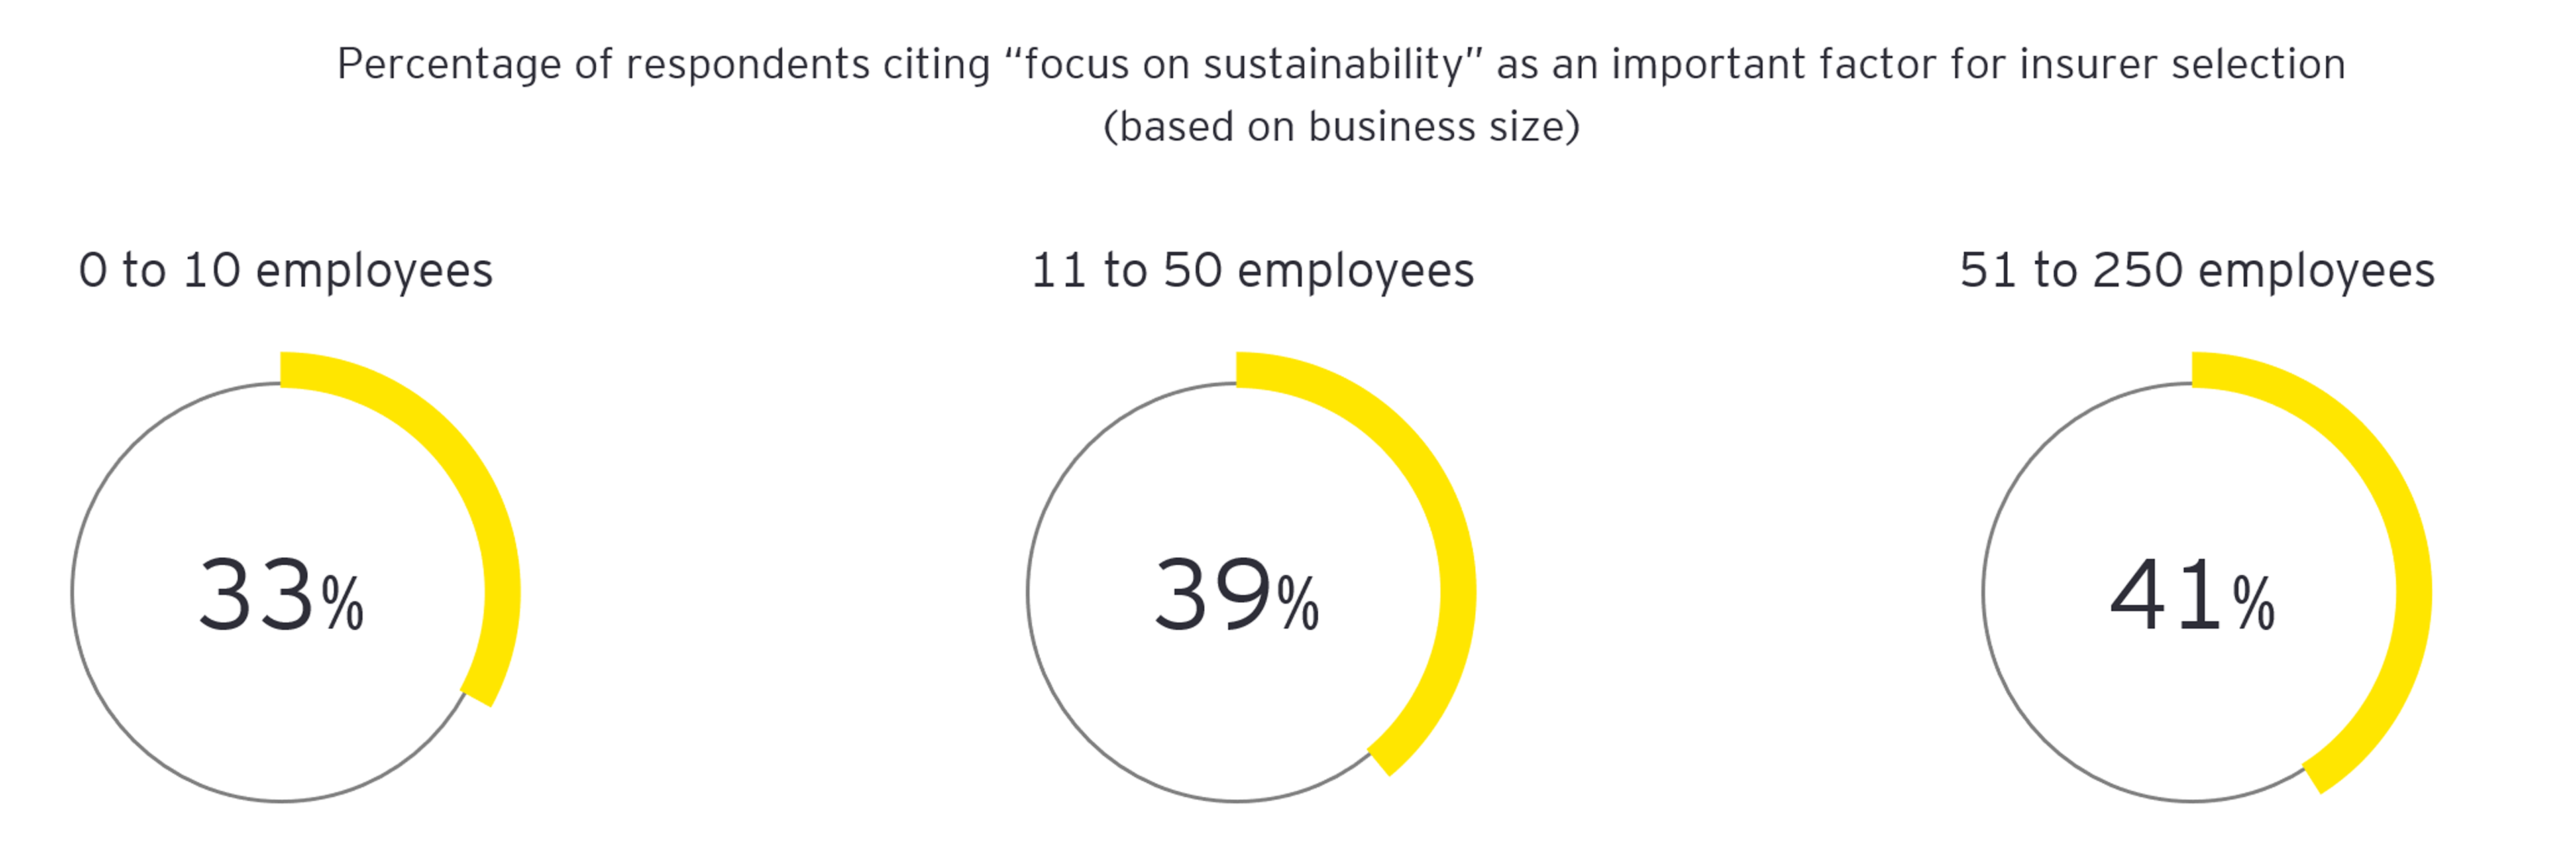 Infographic: Percentage of respondents citing “focus on sustainability” as an important factor for insurer selection (based on business size)